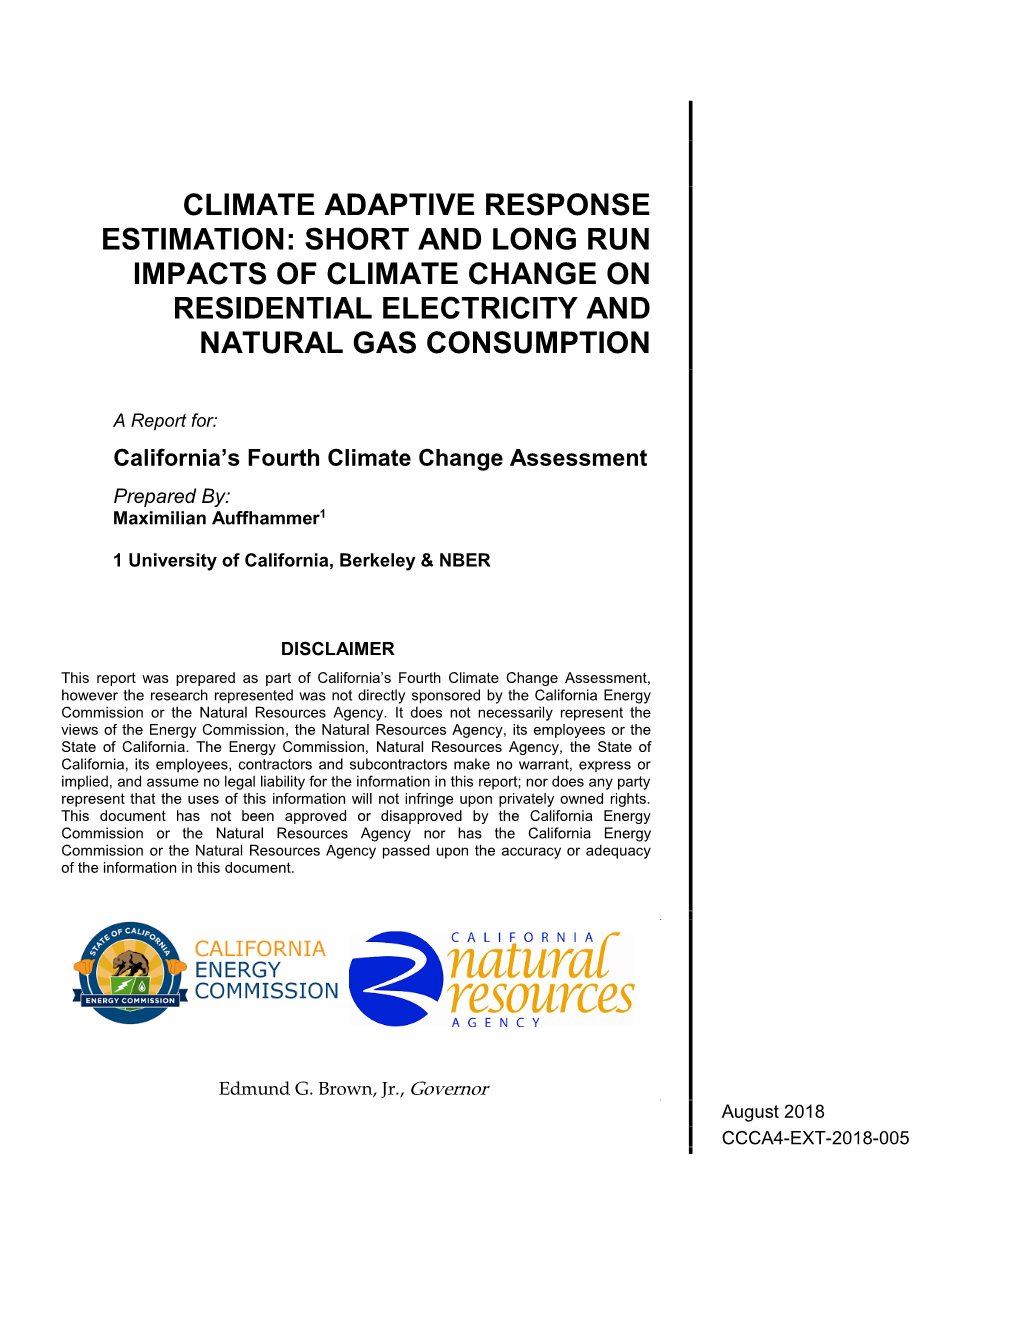 Short and Long Run Impacts of Climate Change on Residential Electricity and Natural Gas Consumption